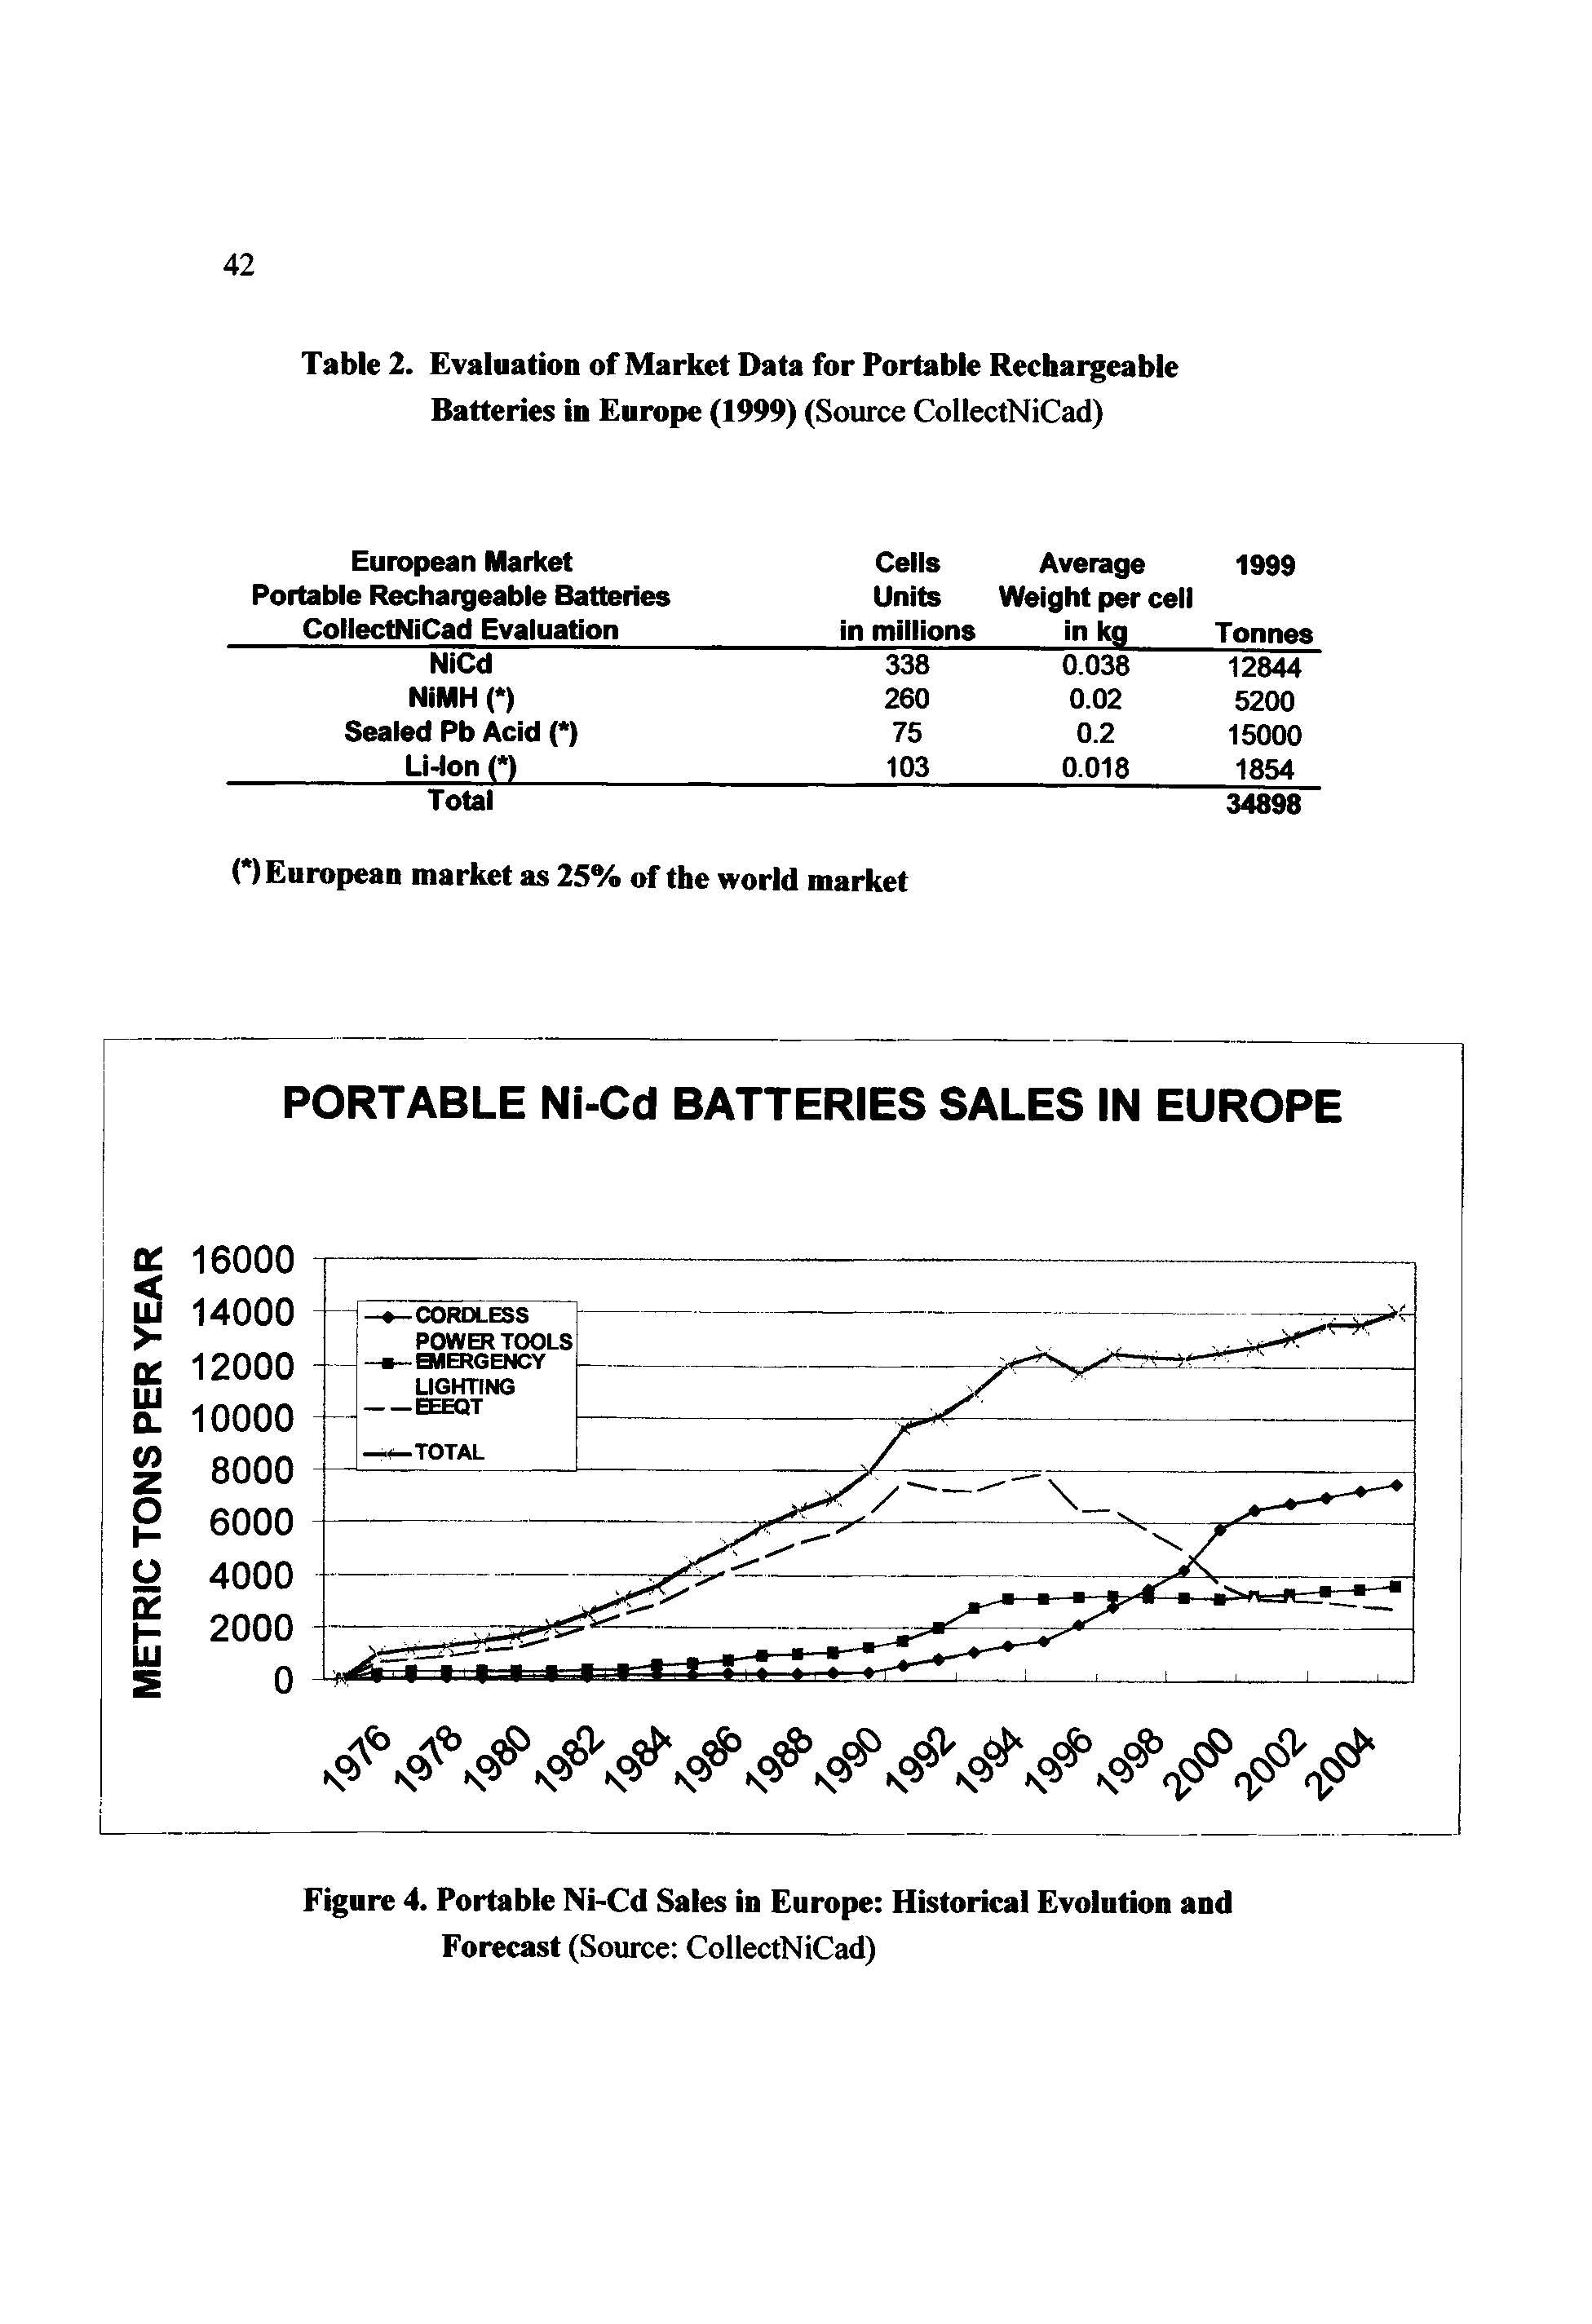 Figure 4. Portable Ni-Cd Sales in Europe Historical Evolution and Forecast (Source ColiectNiCad)...